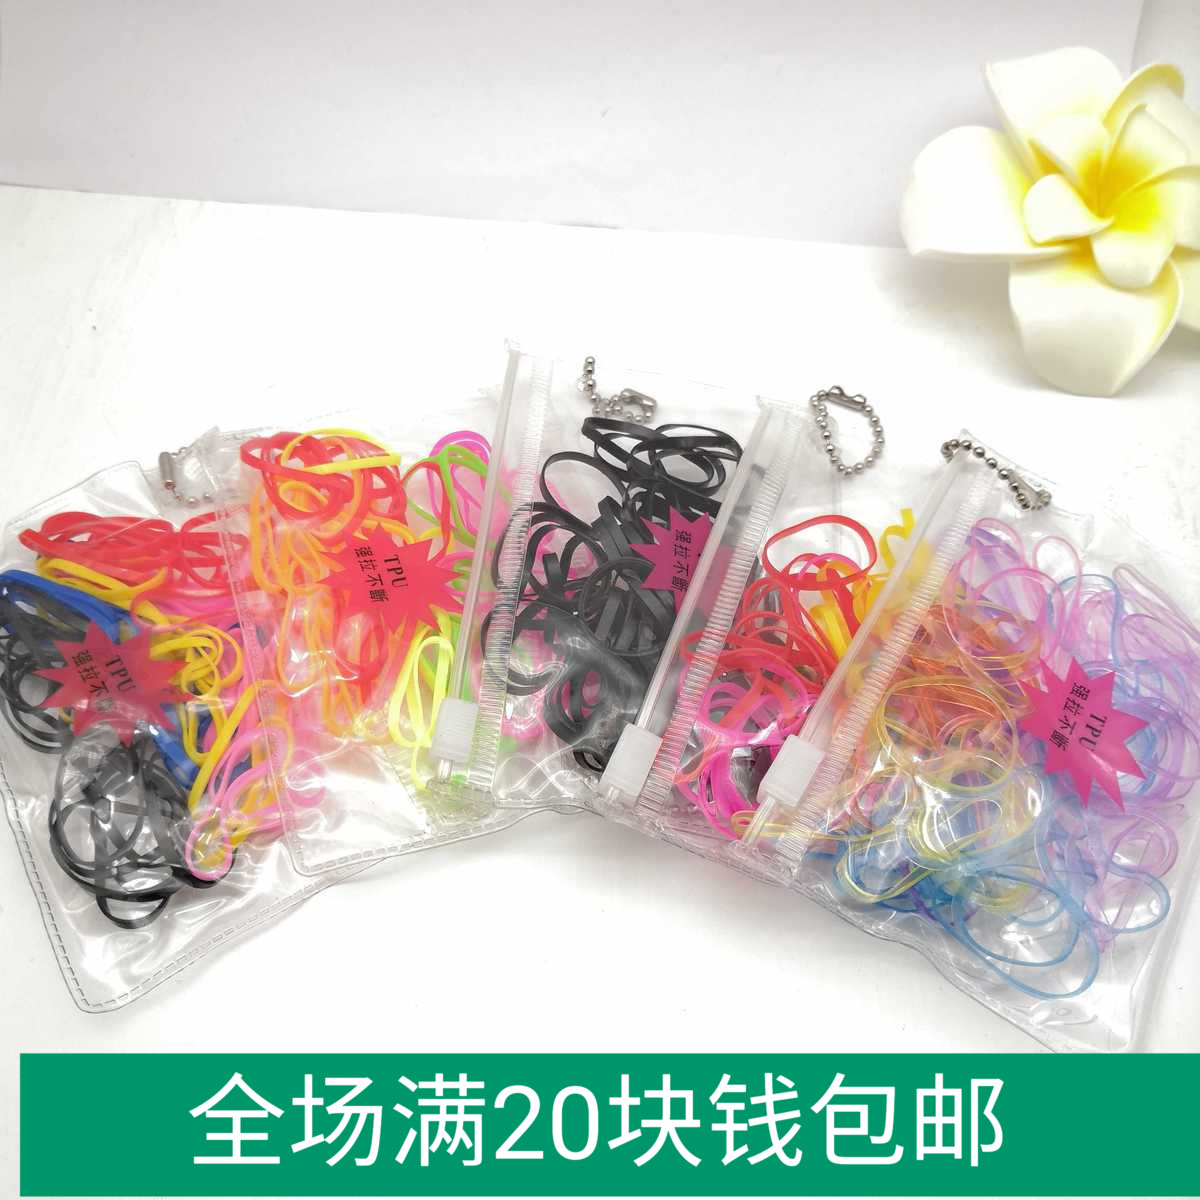 Korean Girls Hair Accessories Headband Zipper Bag Strong Pull Constantly Rubber Band Baby Disposable Children Hair Band Full Free Shipping